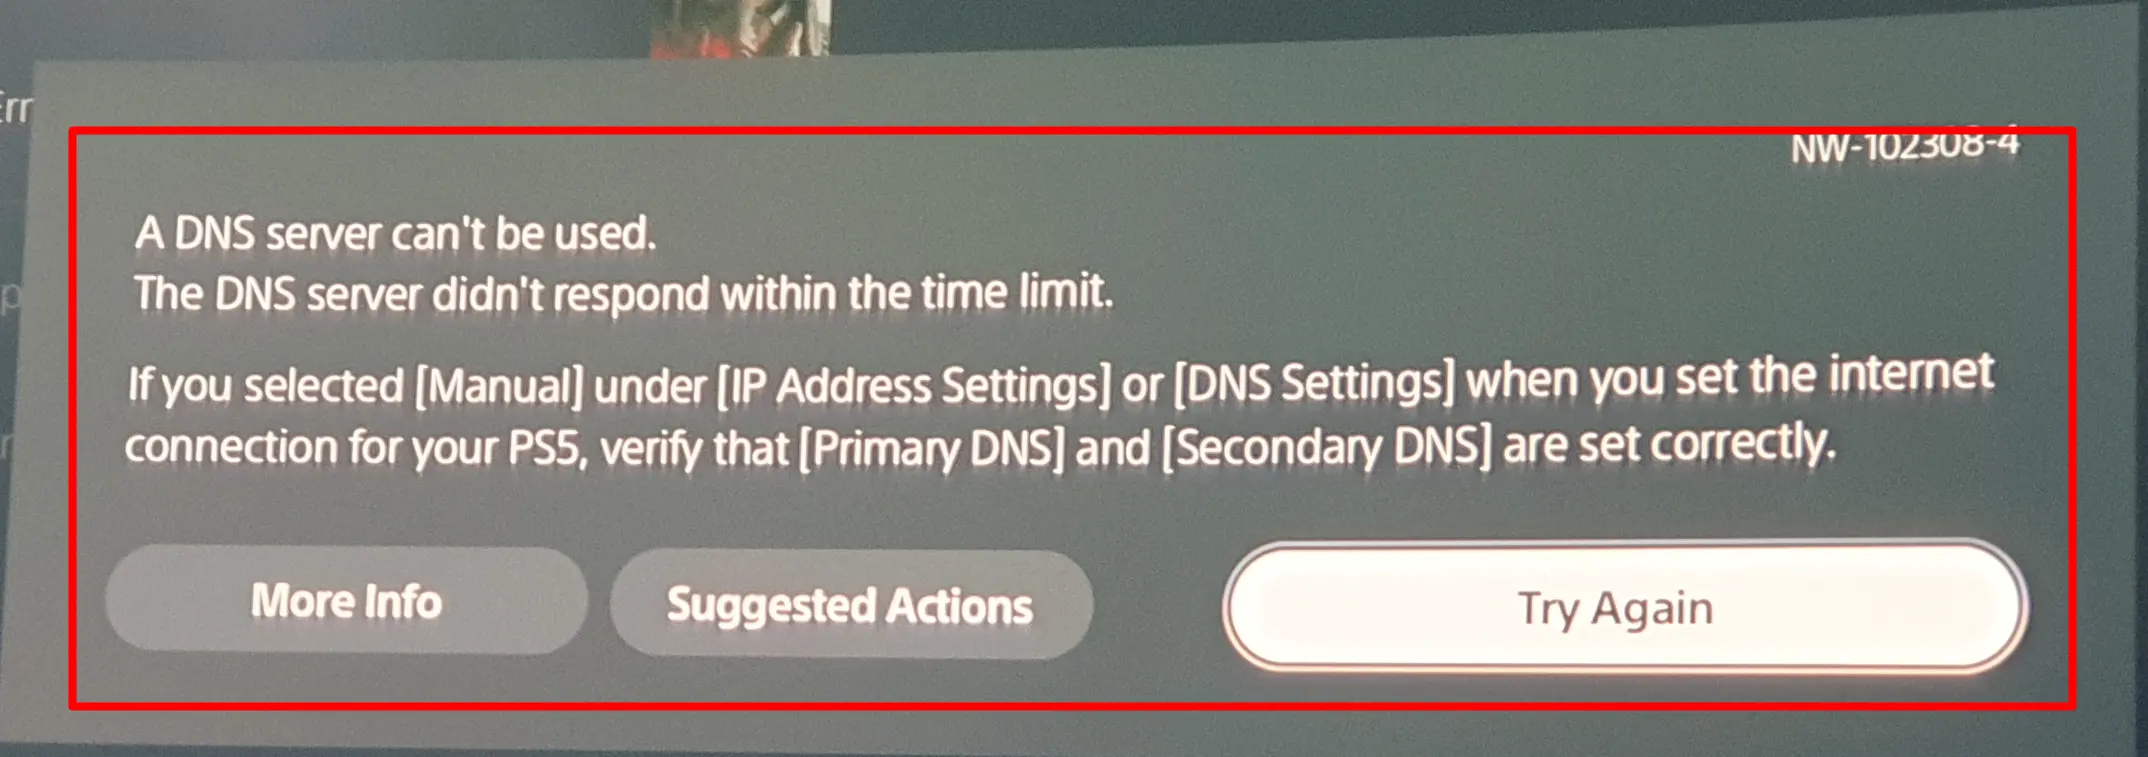 DNS Server Cannot Be Used PS5